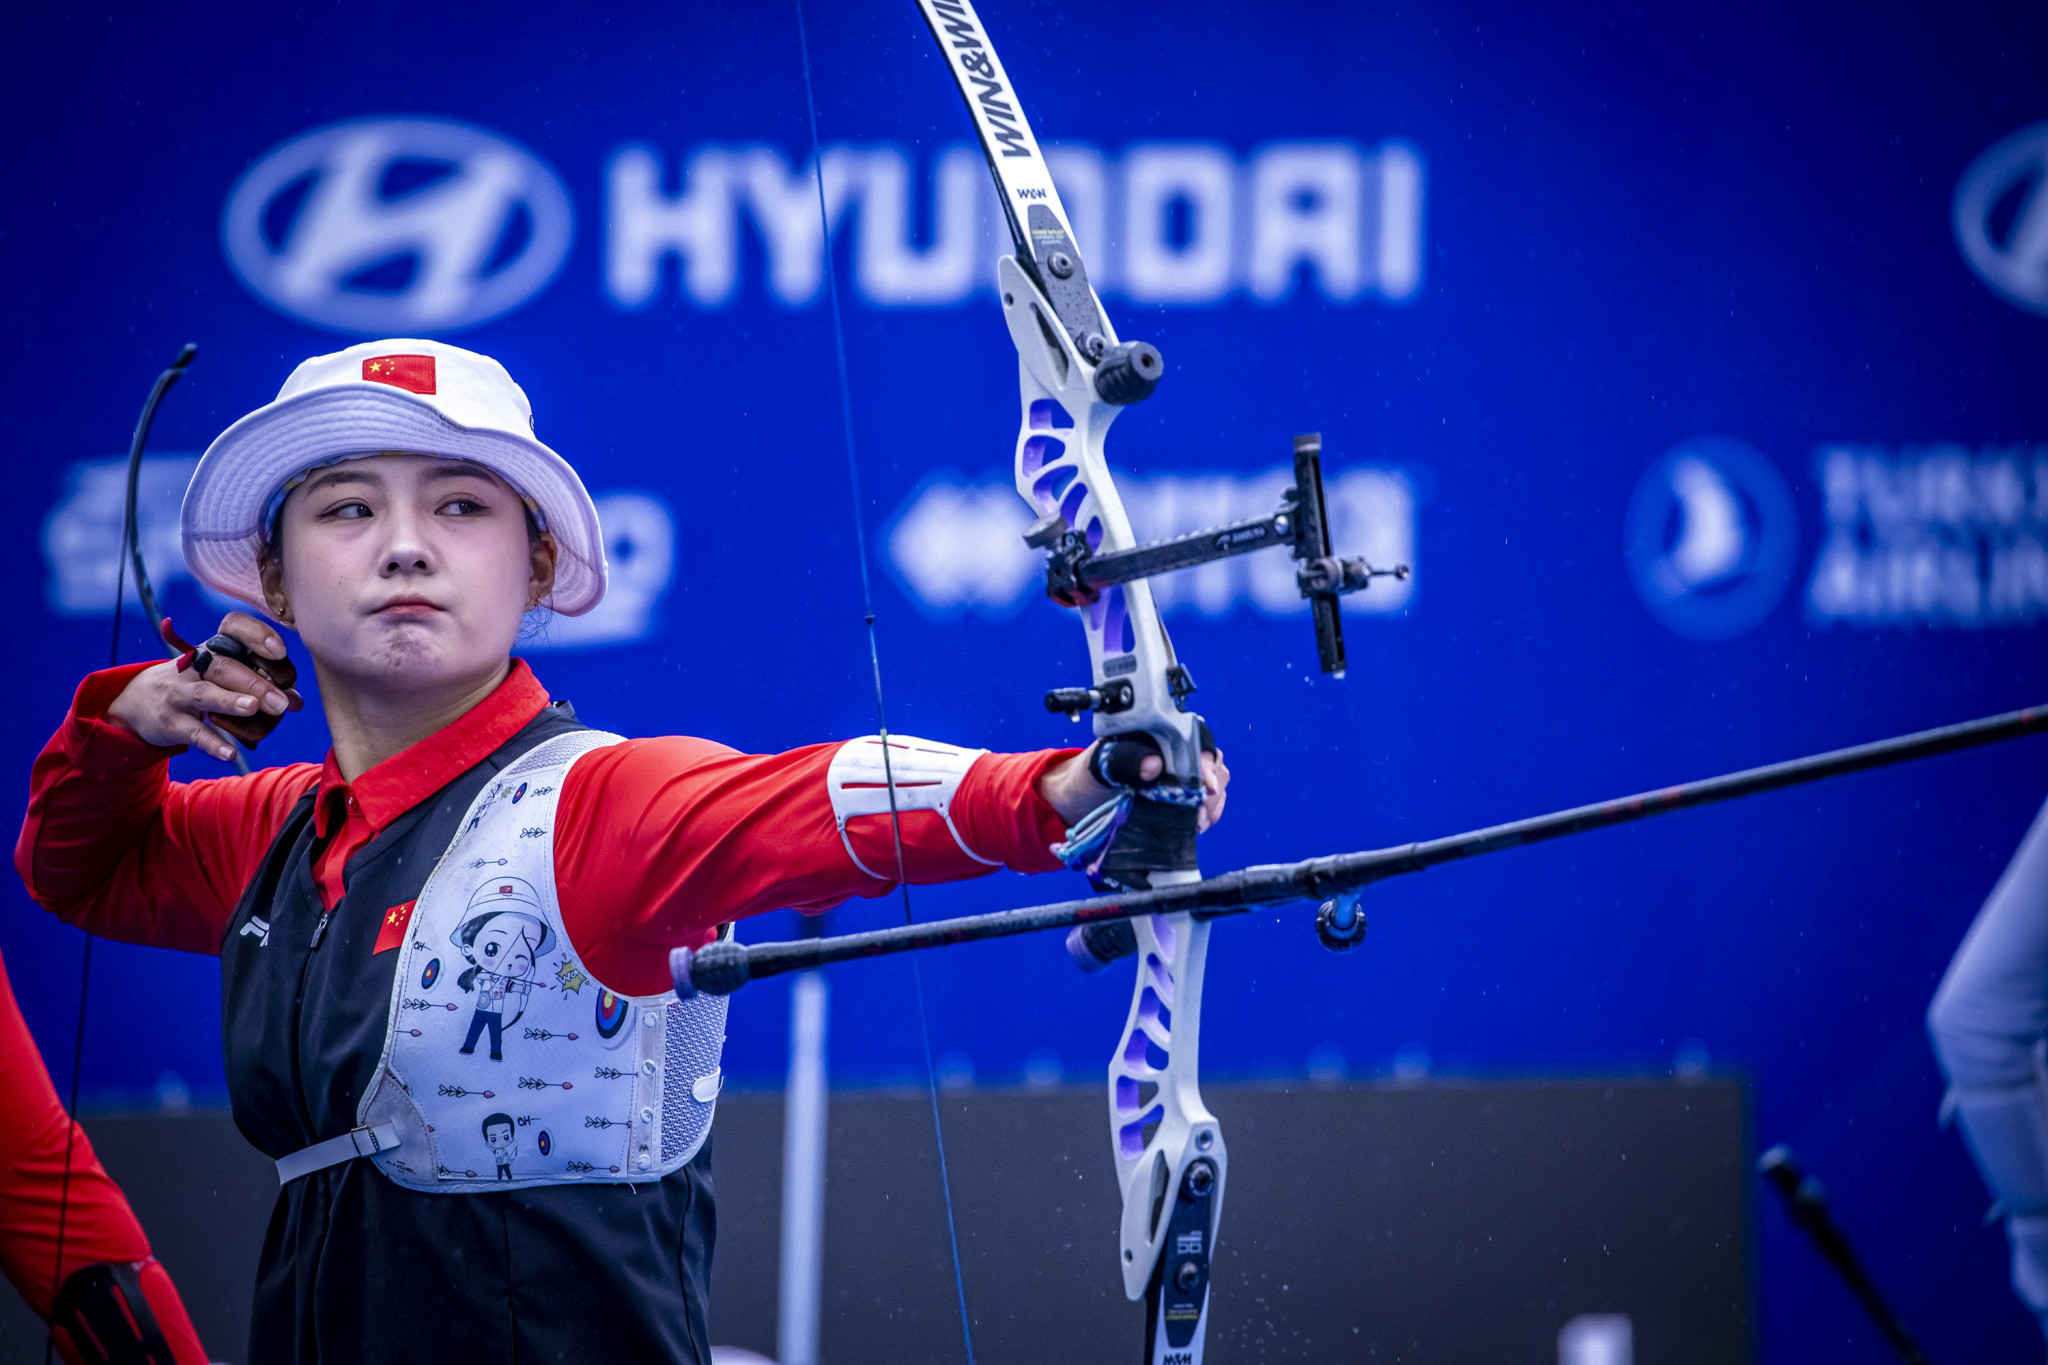 Jiaman got ger hands on a first ecer medal at the Archery World Cup in China. GETTY IMAGES